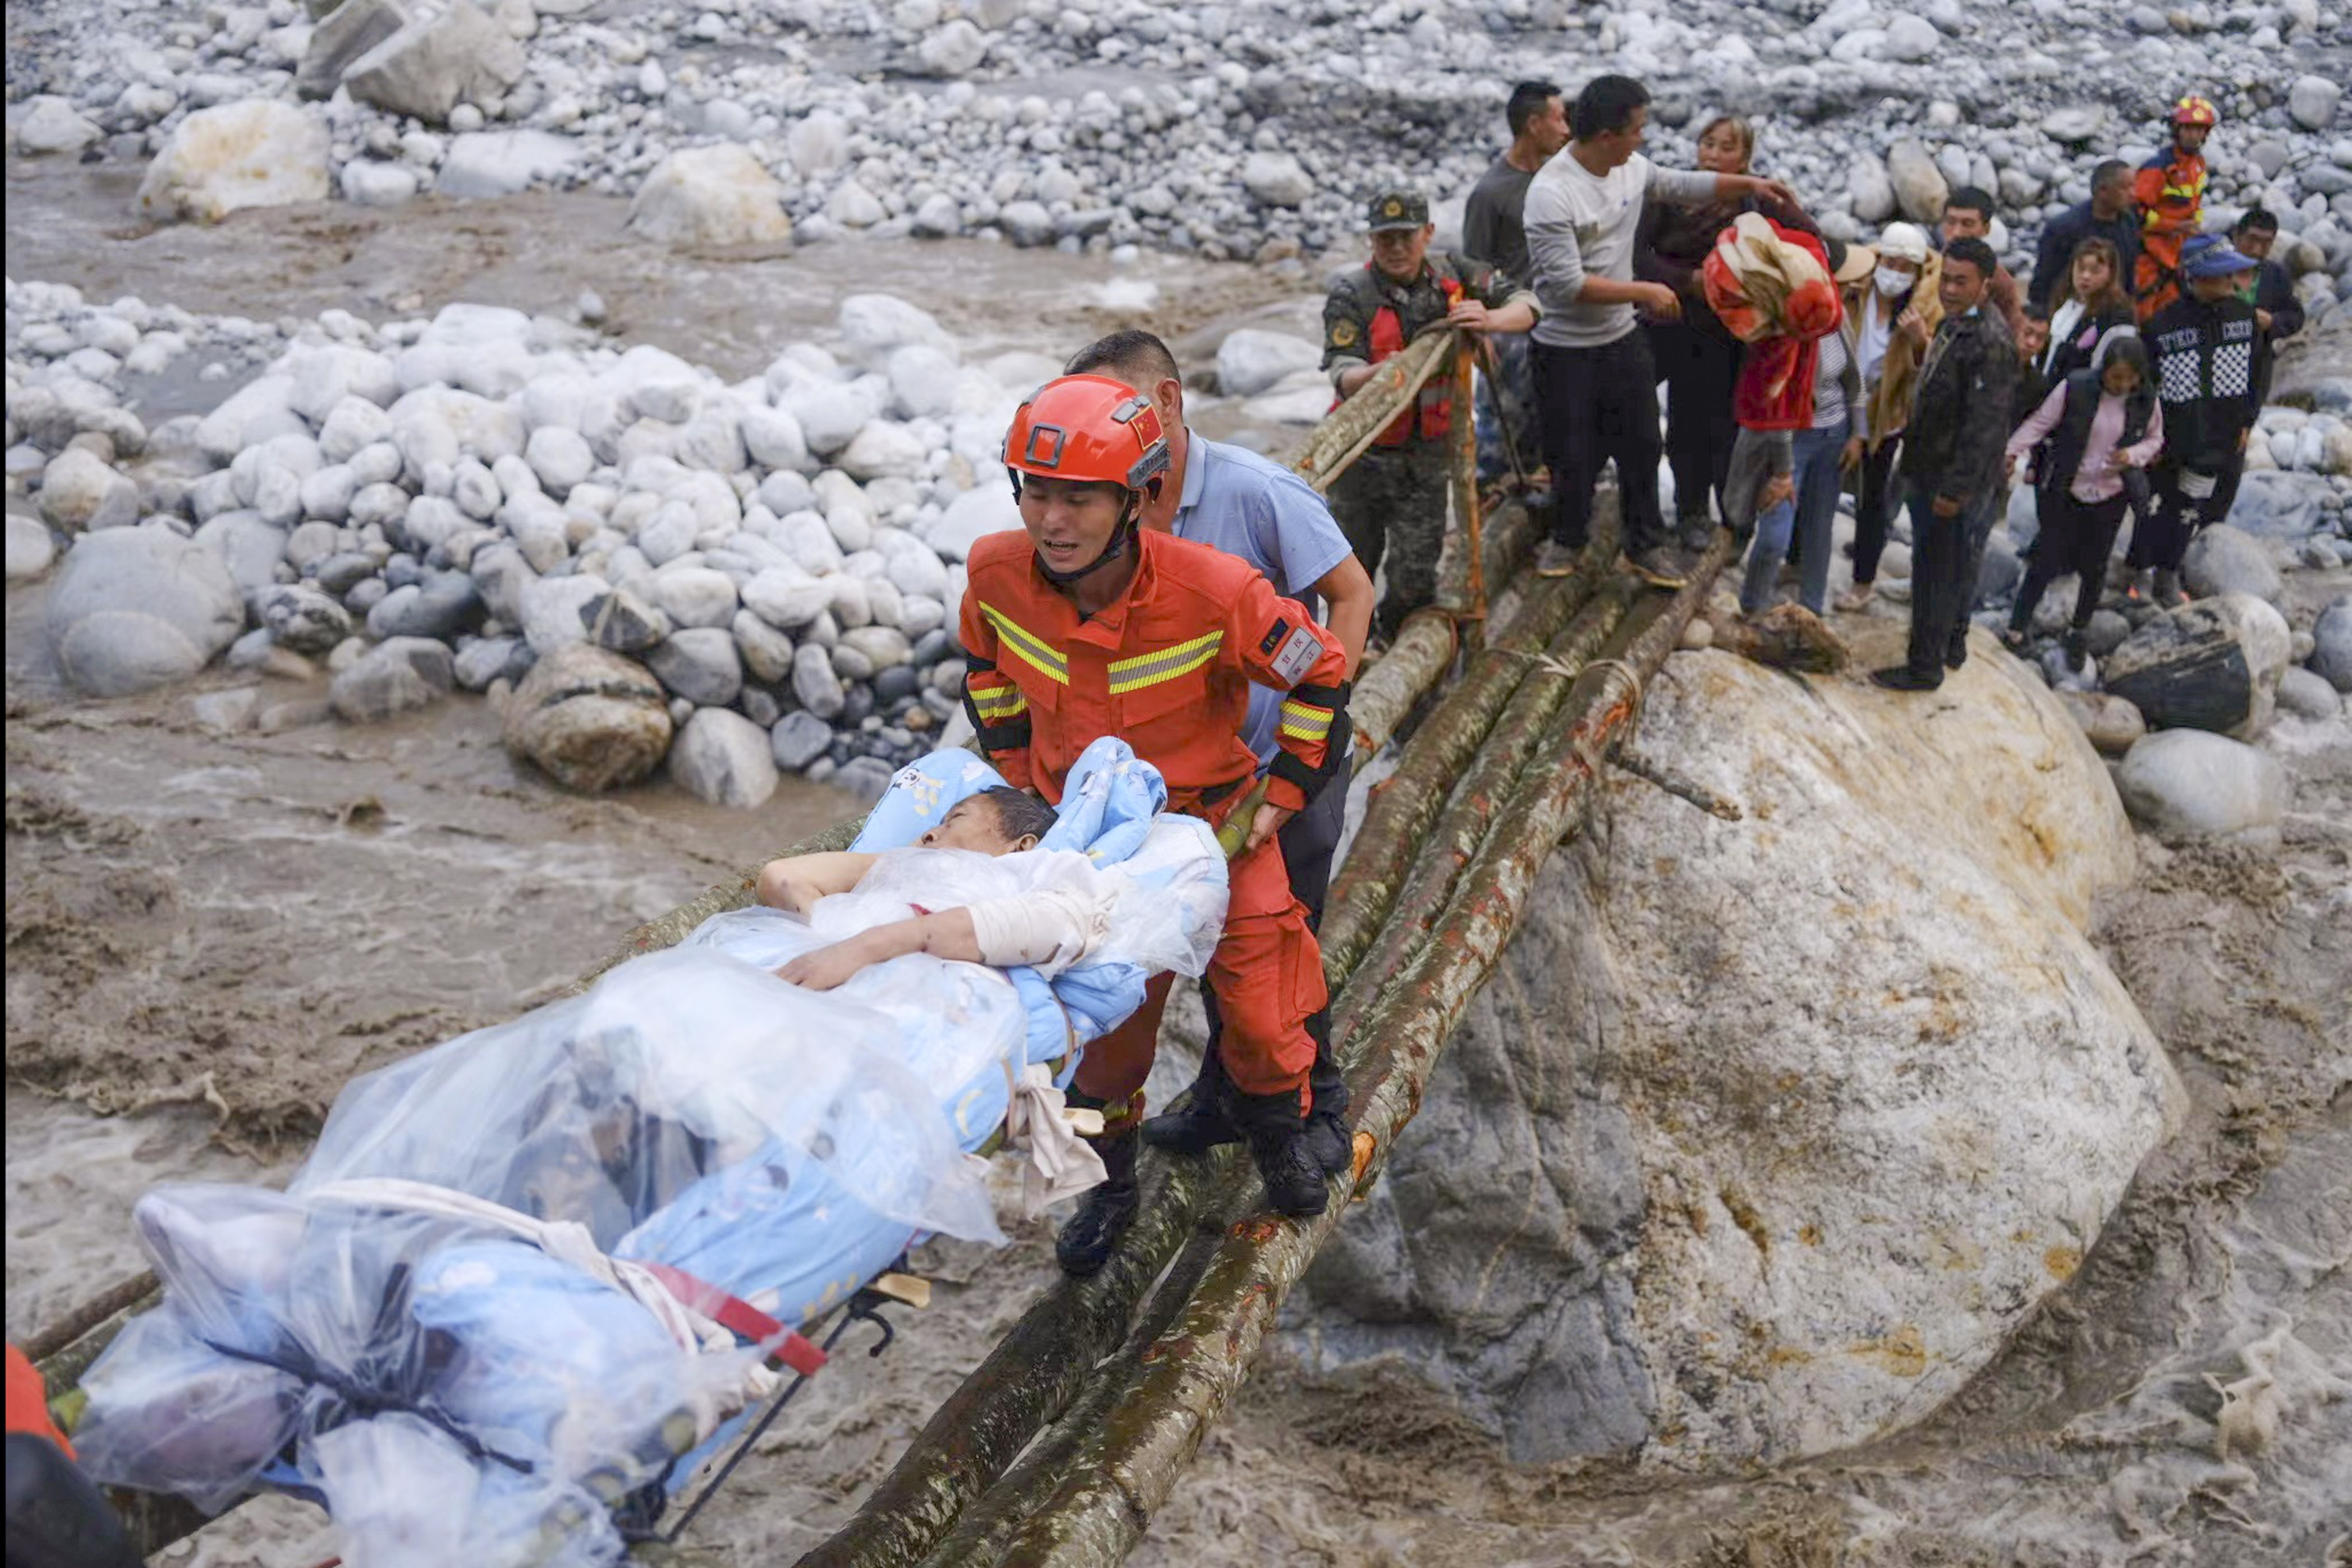 Rescuers transfer survivors across a river following an earthquake in China’s Sichuan Province. Photo: AP